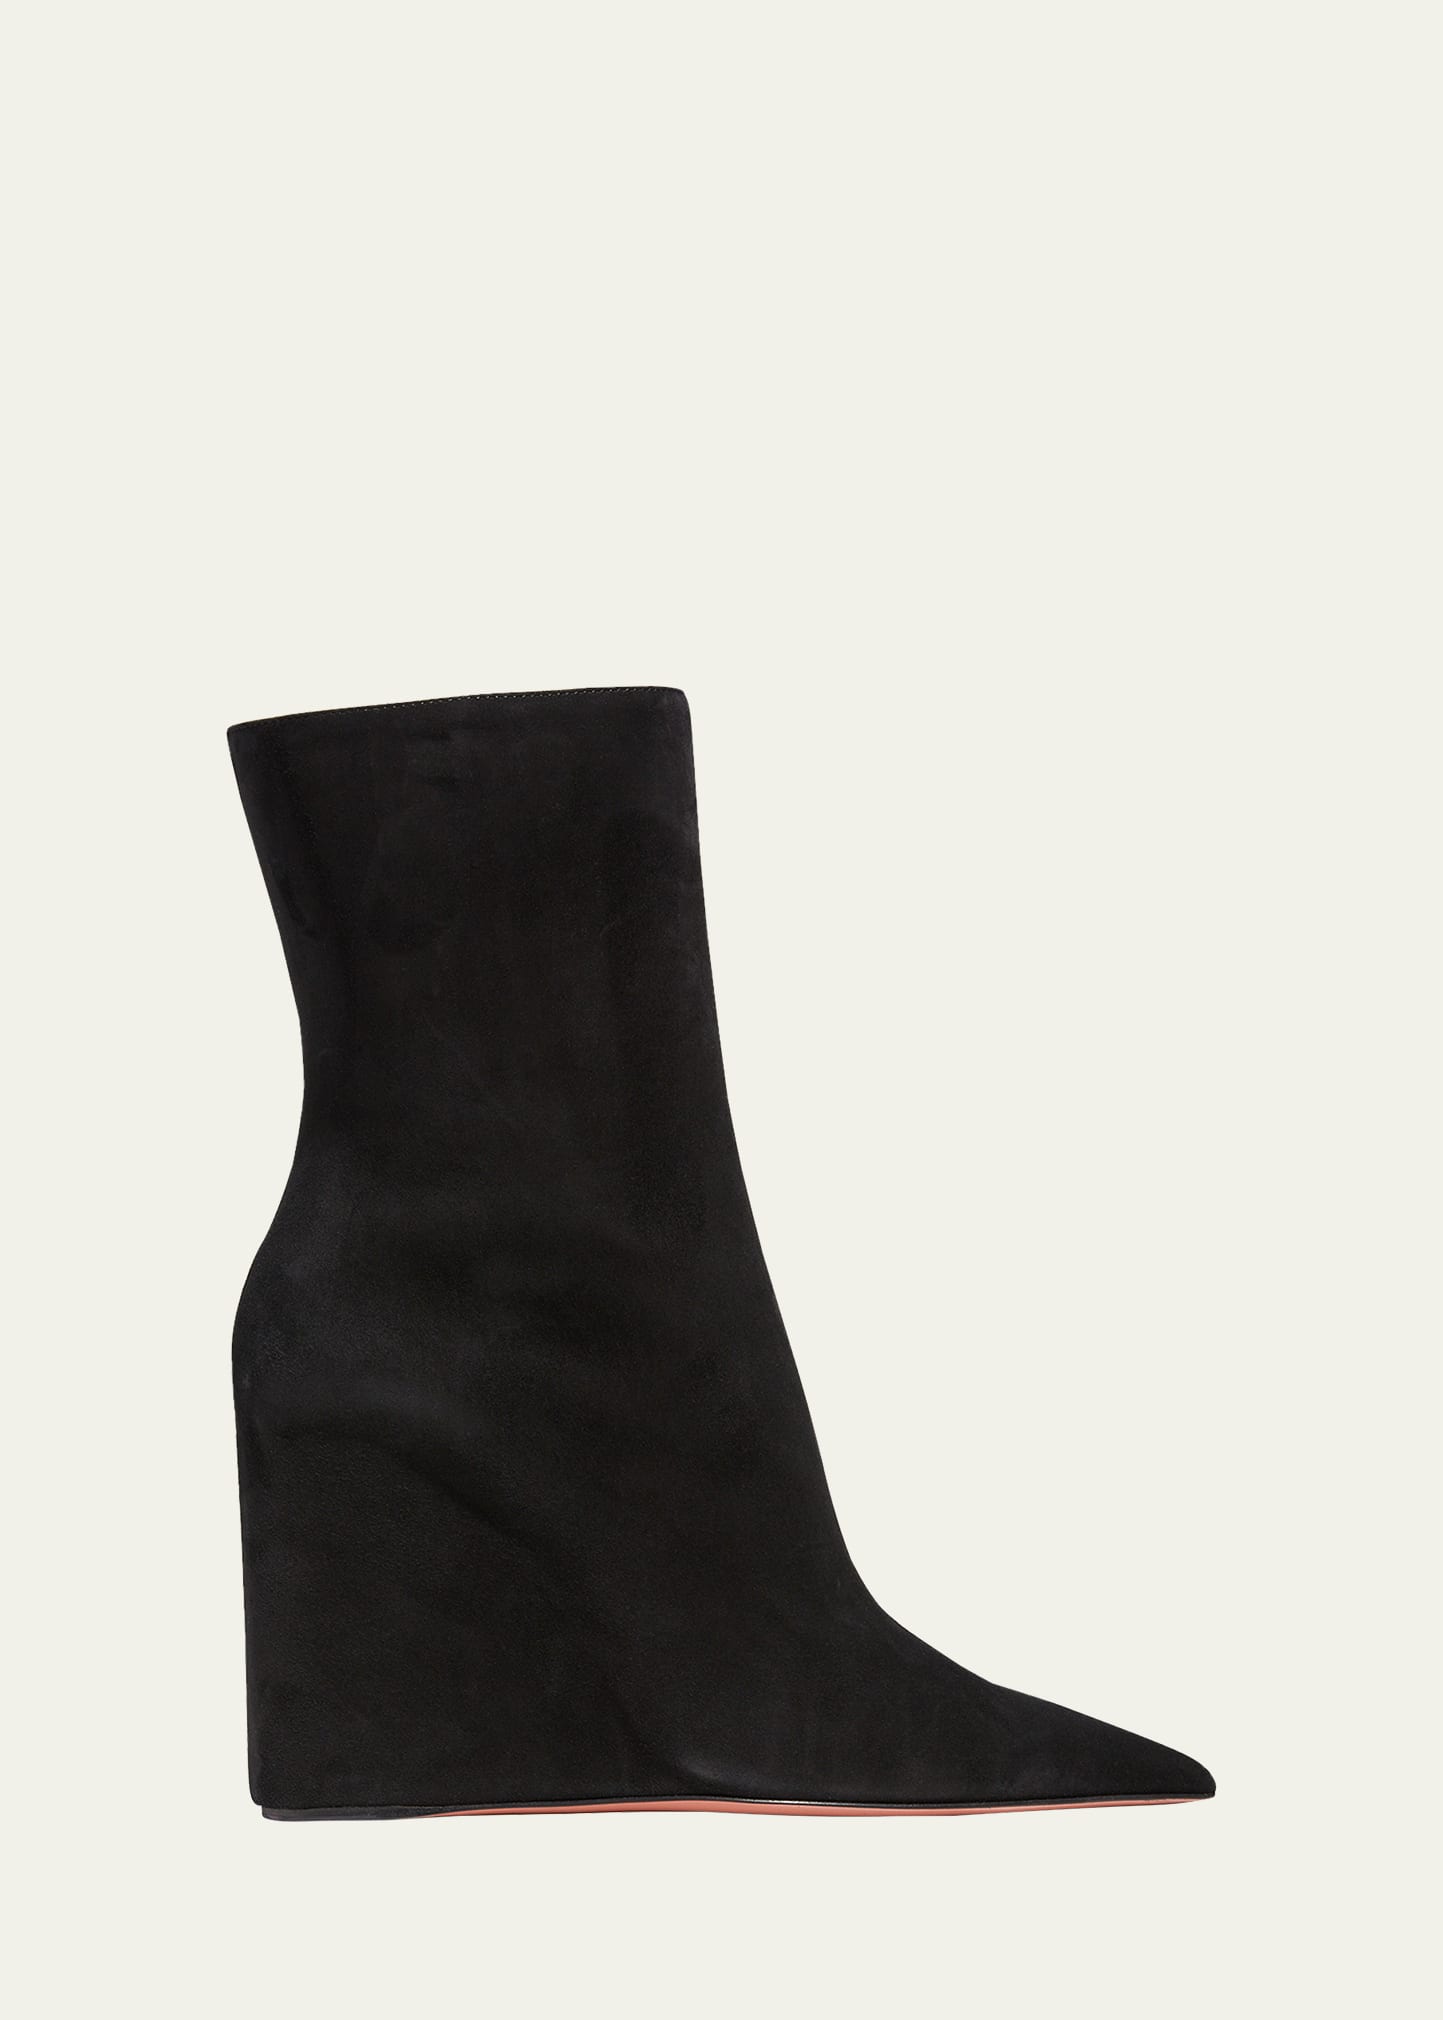 Amina Muaddi Pernille 95mm Pointed Wedge Booties